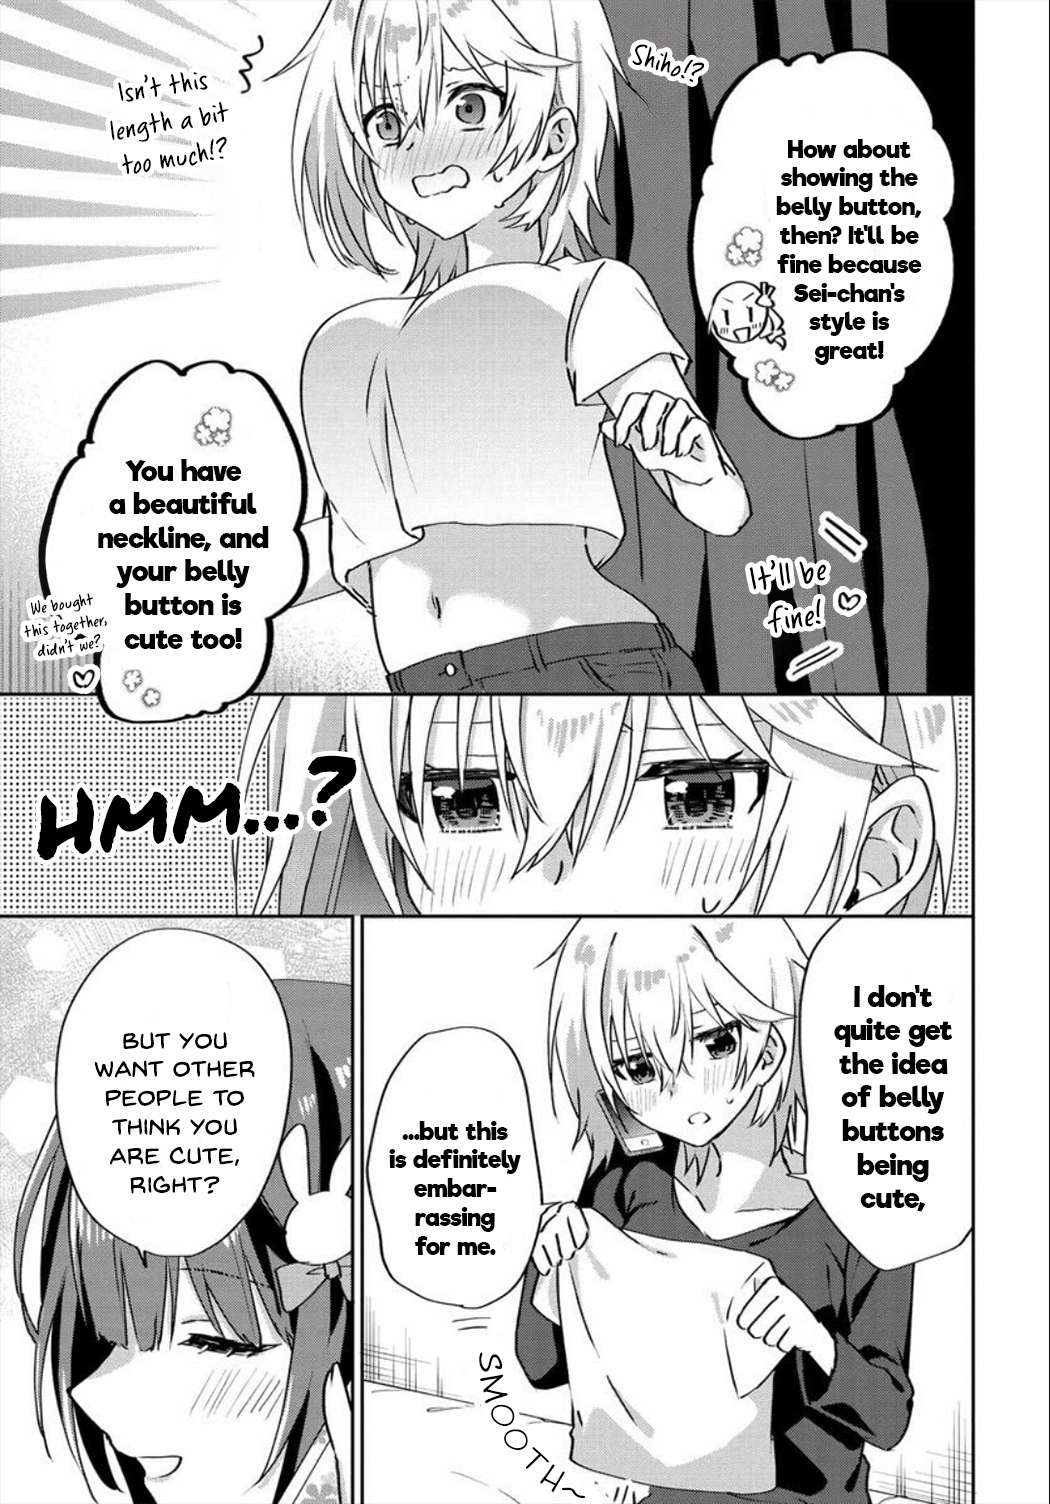 Since I’Ve Entered The World Of Romantic Comedy Manga, I’Ll Do My Best To Make The Losing Heroine Happy - chapter 6.6 - #3